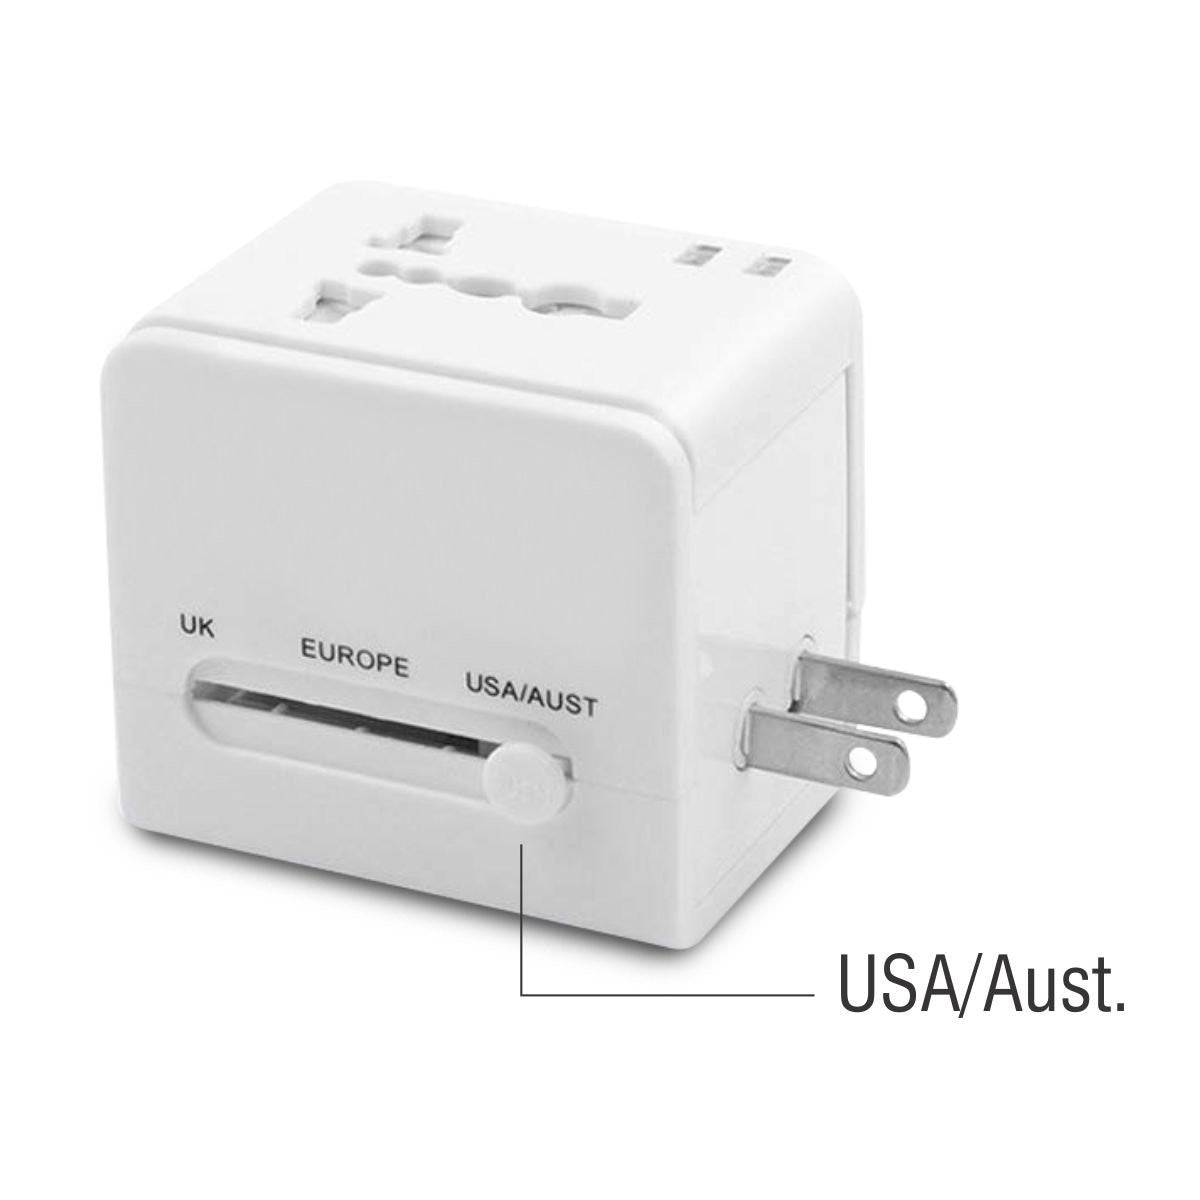 Multinational Universal Charger and Travel Adaptor with Dual USB Port - for Promotions, Giveaway, Event Freebies, Corporate, and Personal Gifting BGE250